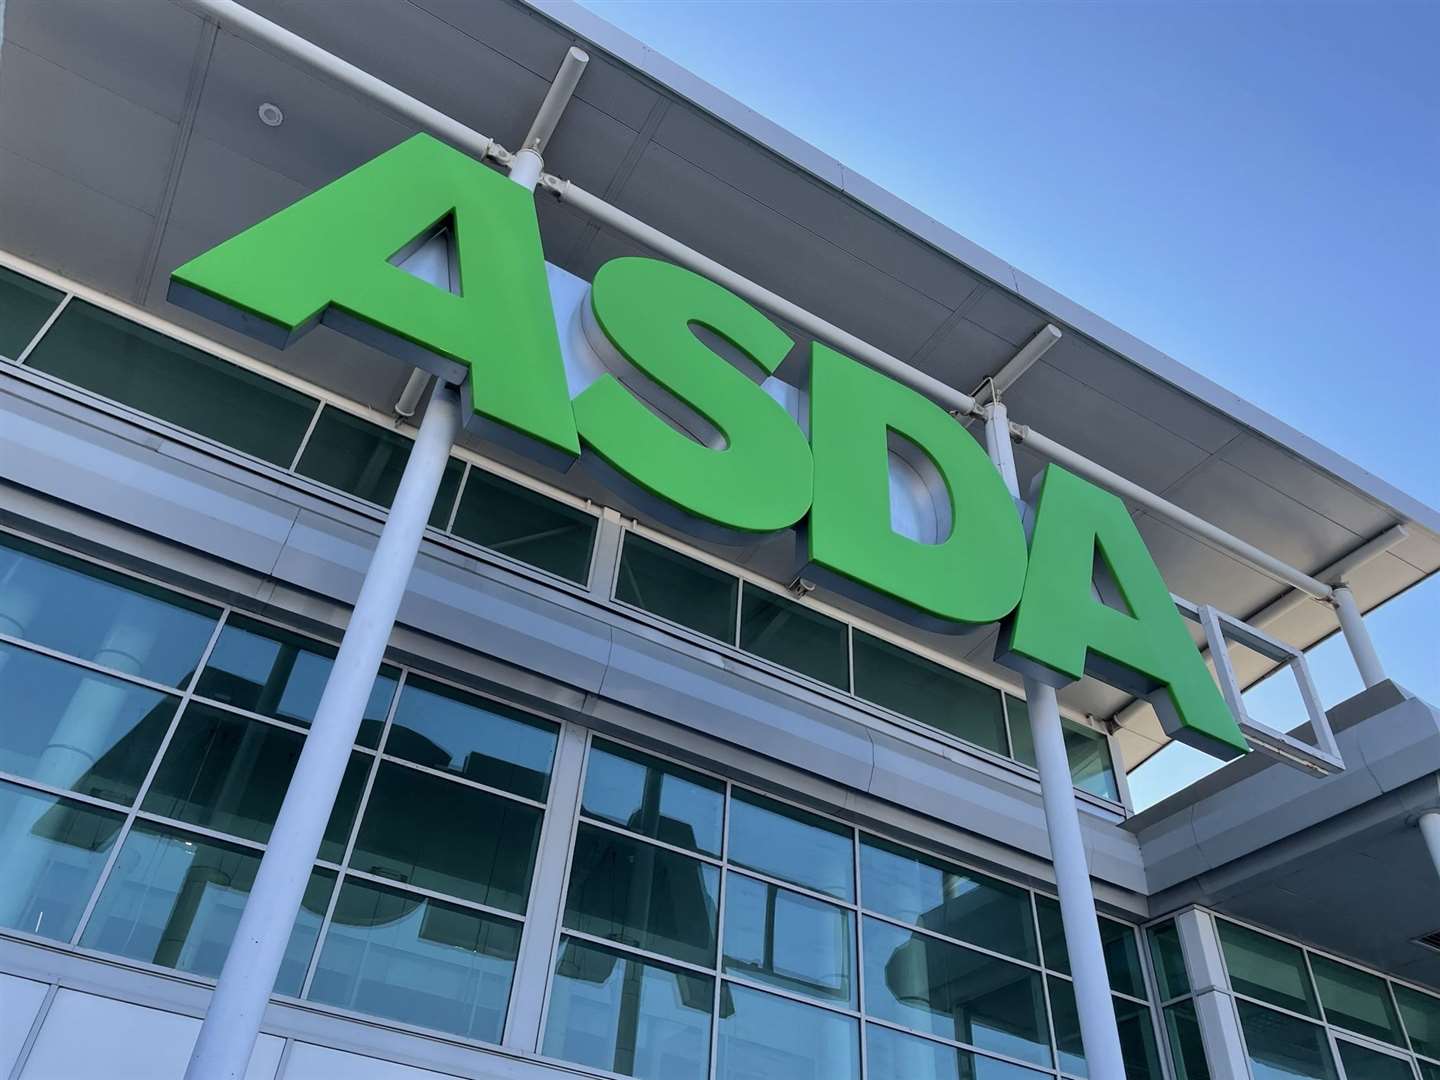 Asda is asking customers with either product to return them